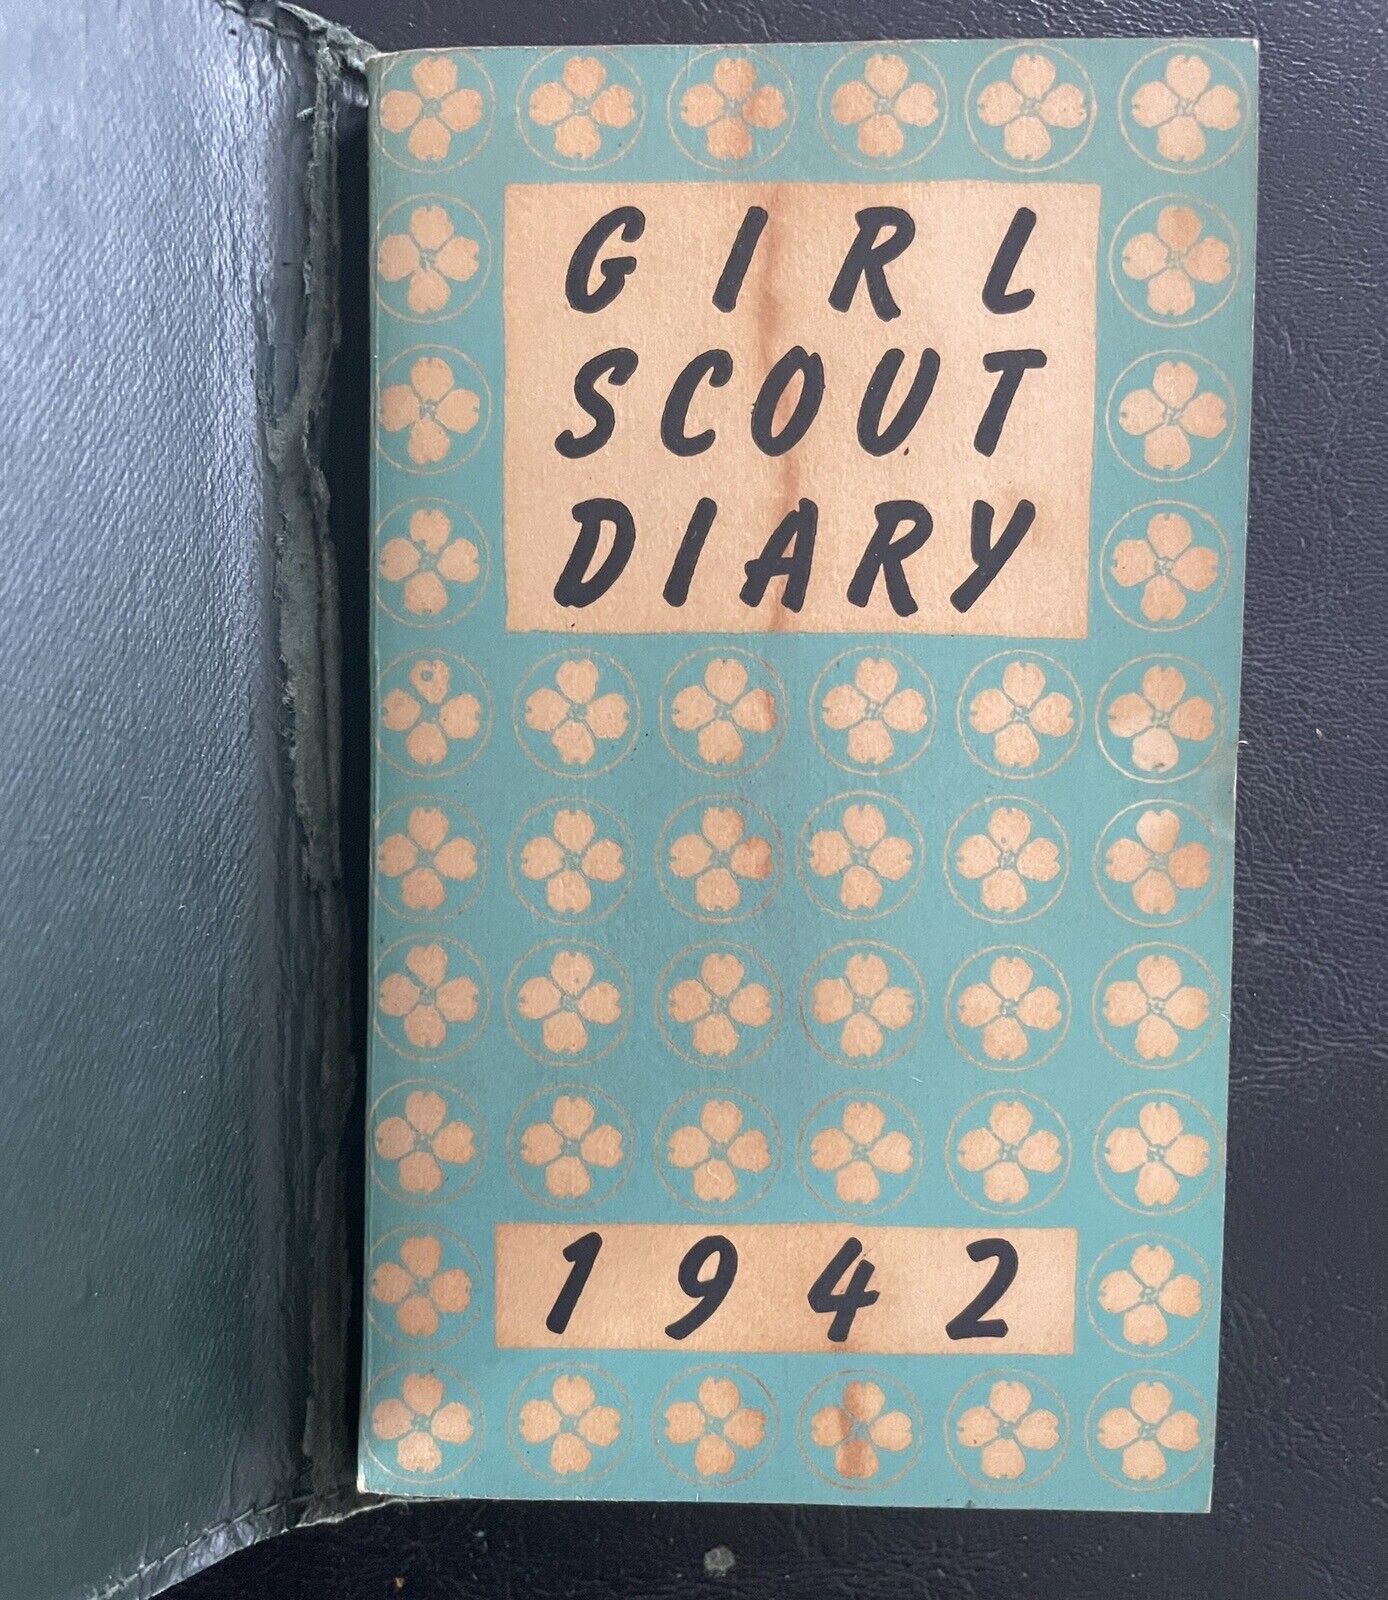 VERY RARE VINTAGE GIRL SCOUT DIARY 1942 With WRITING, INFORMATION, HISTORY